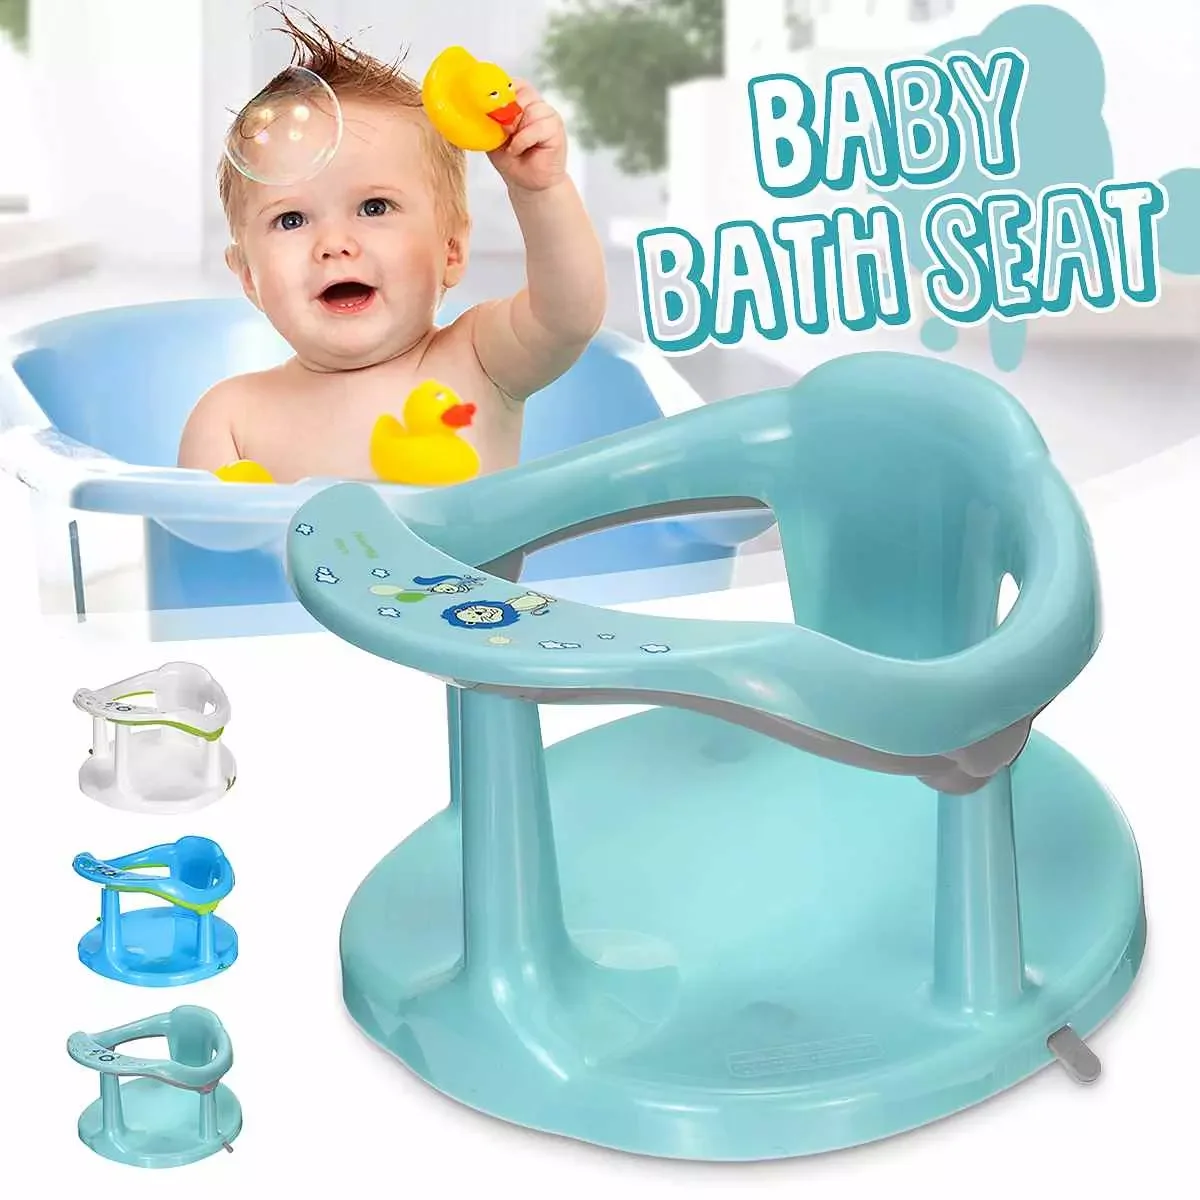 

Baby Bath Chair Child With Suction Cup Safe And Stable Child Bathtub Non-Slip Stool Baby Safety Seat Removal Bathtub Chair